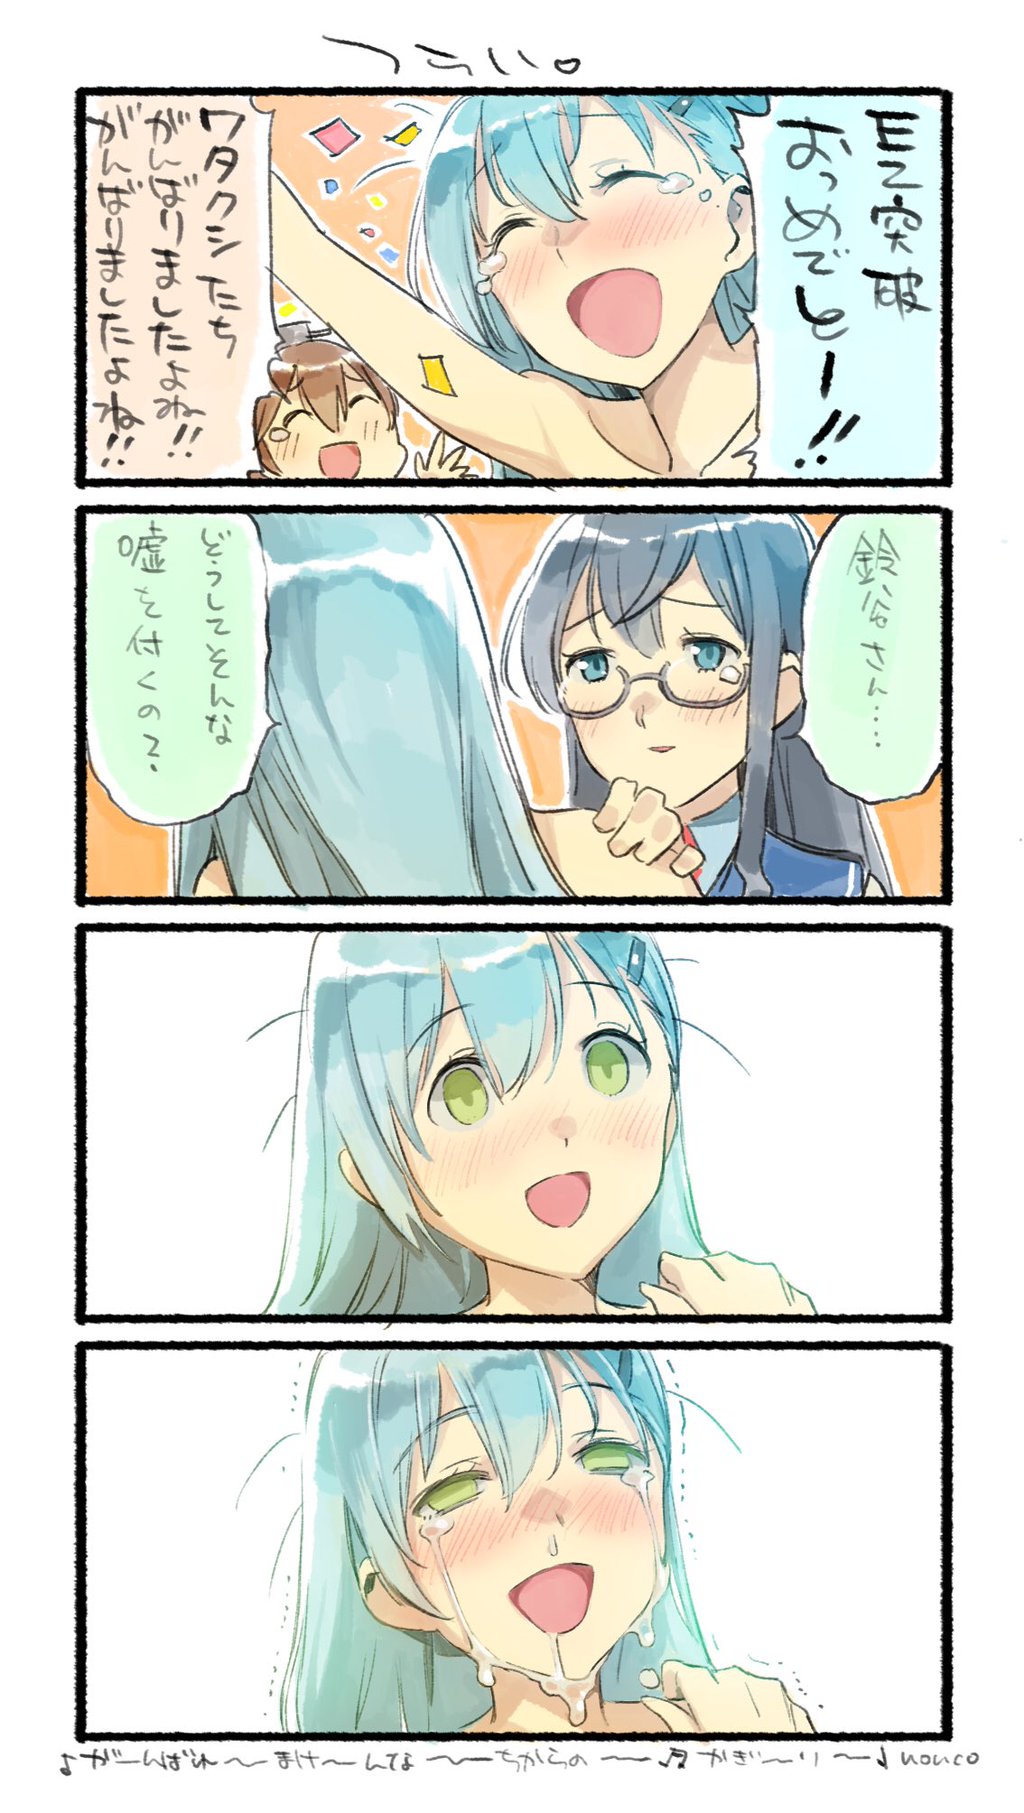 3girls 4koma aqua_hair black-framed_glasses black_hair blue_eyes blush brown_hair closed_eyes comic commentary_request confetti crying crying_with_eyes_open drooling empty_eyes glasses green_eyes hair_ornament hairclip hand_on_another's_shoulder highres kantai_collection kumano_(kantai_collection) long_hair mind_break multiple_girls no_shirt nonco ooyodo_(kantai_collection) open_mouth runny_nose saliva school_uniform suzuya_(kantai_collection) tears translation_request trembling